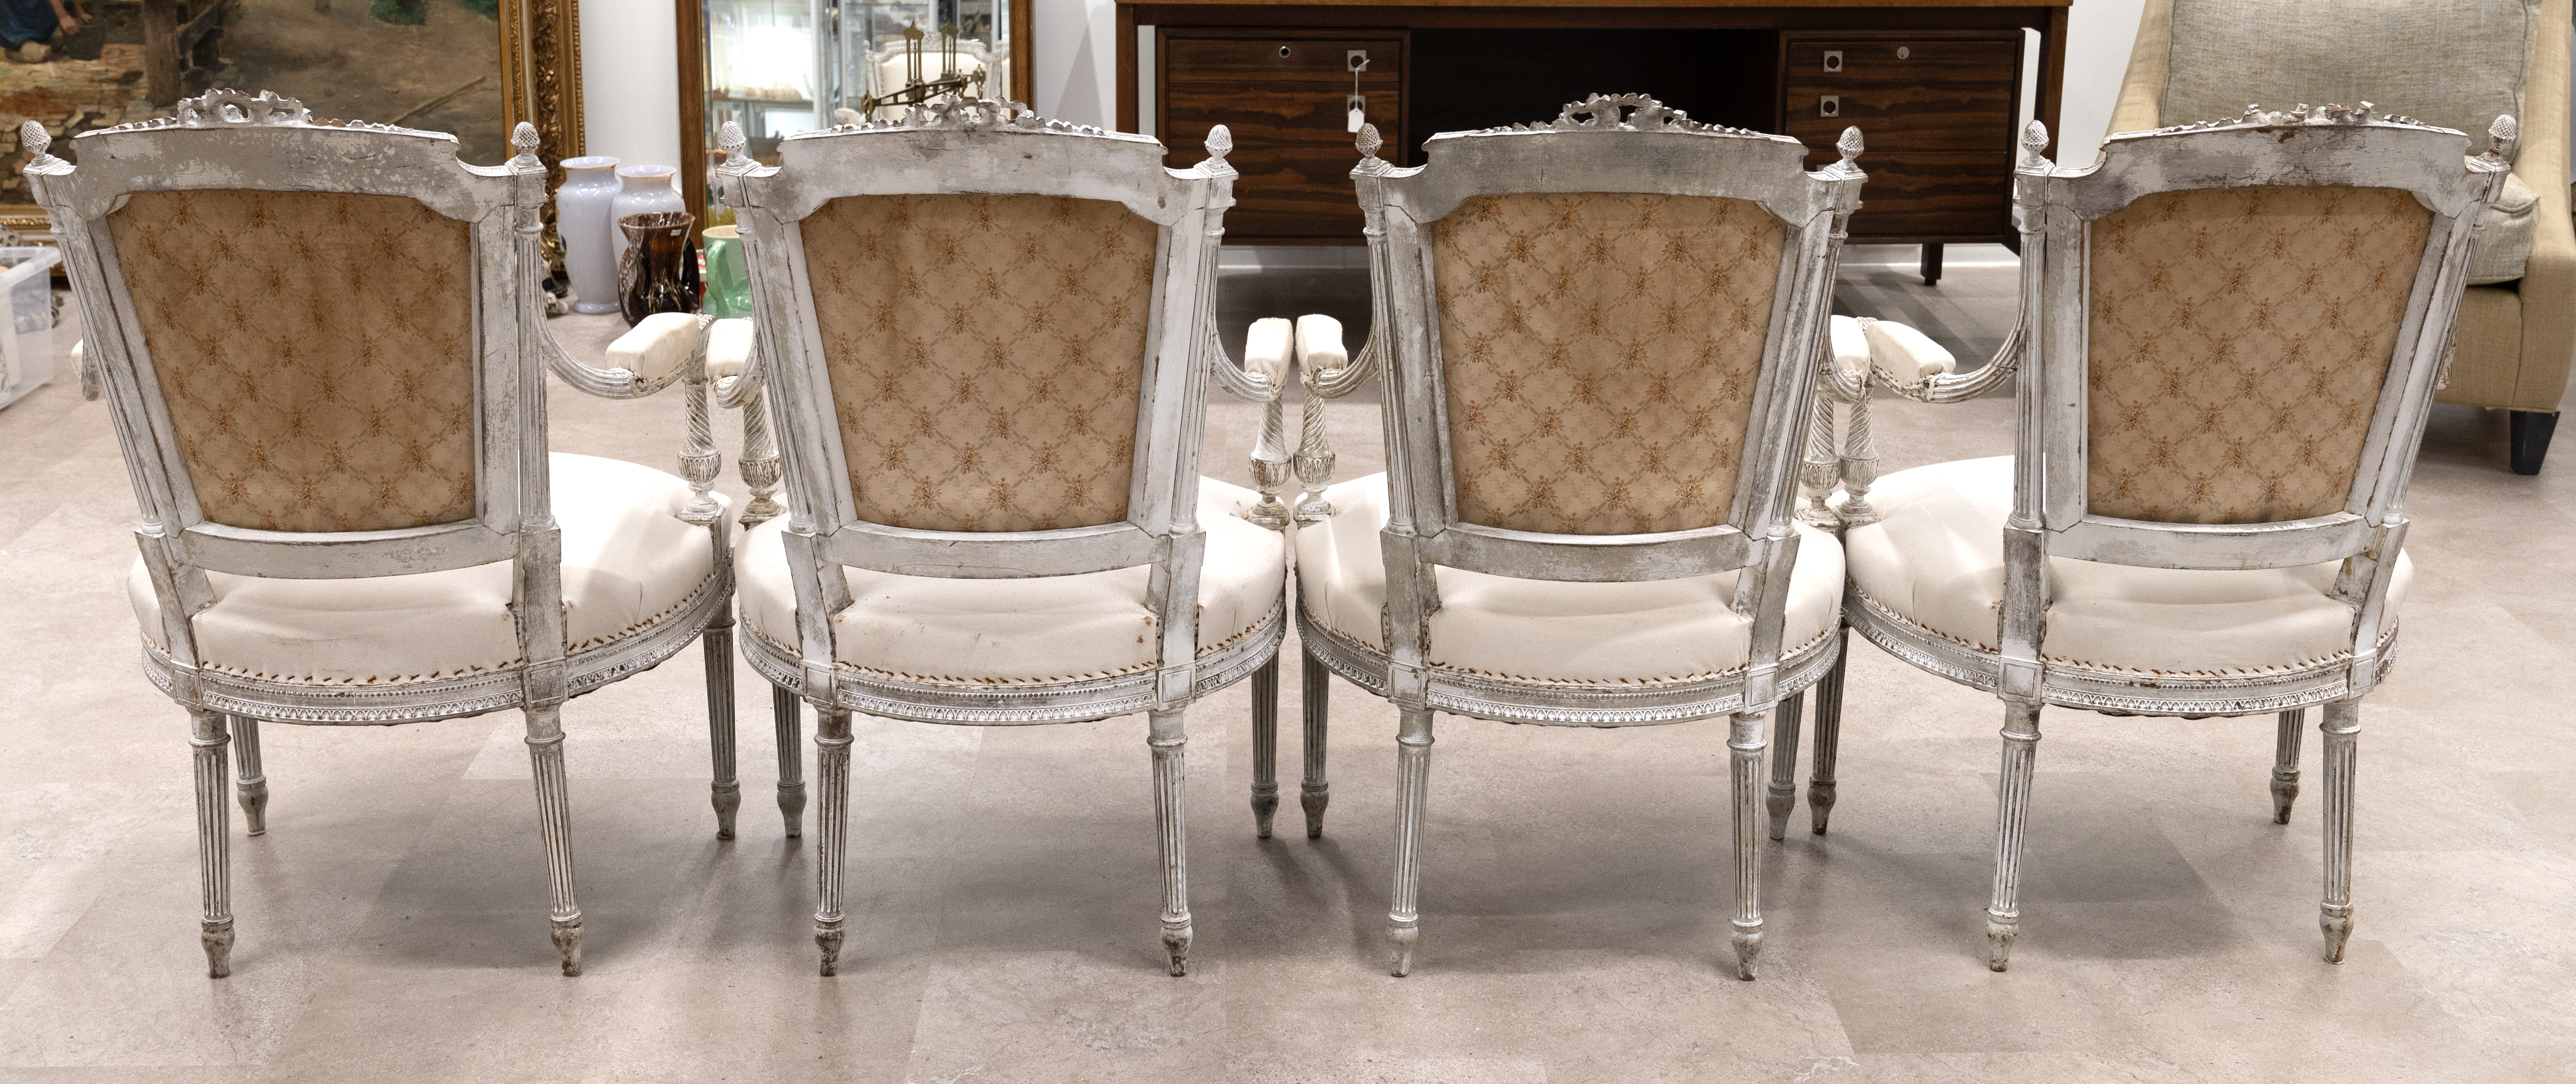 Set of four French 19th century Louis XVI style armchairs. Carved wood frames with ribbon detail ... - Image 2 of 4